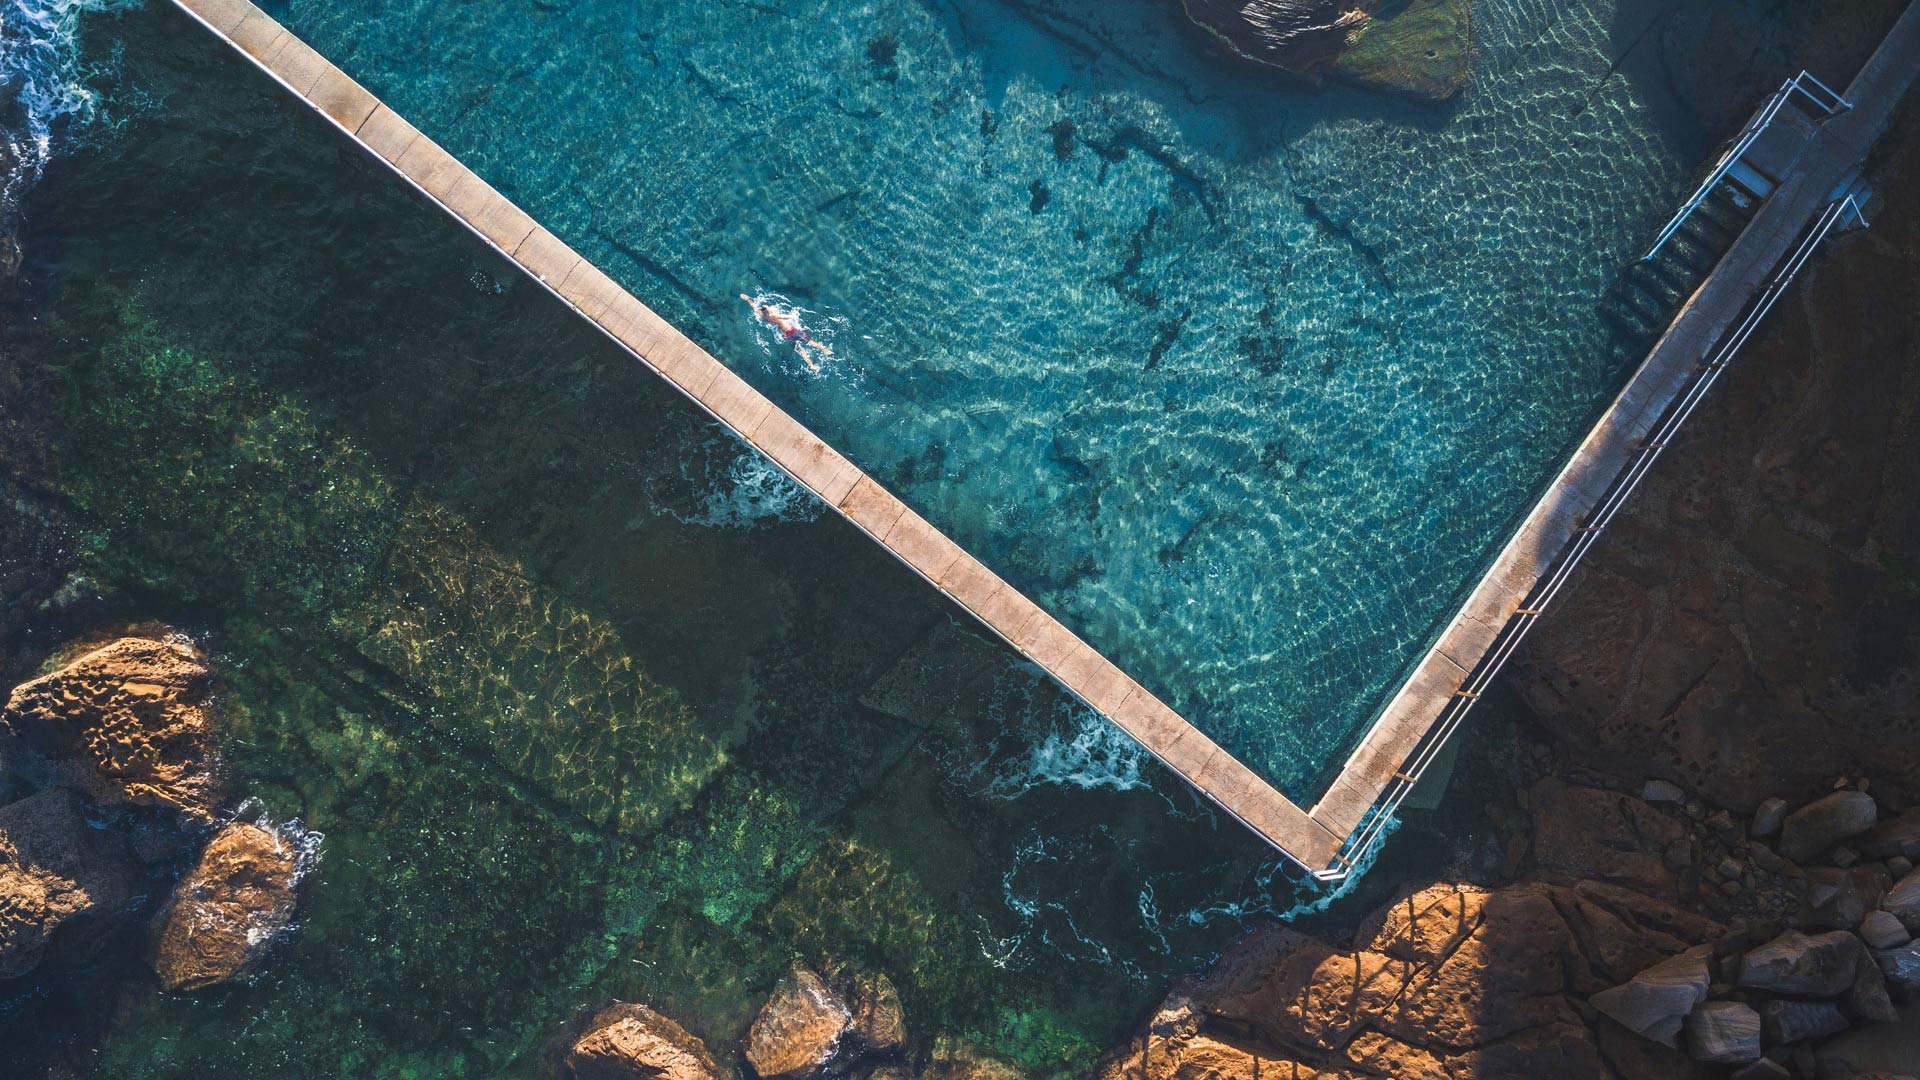 5 of the most photogenic rock pools in Sydney